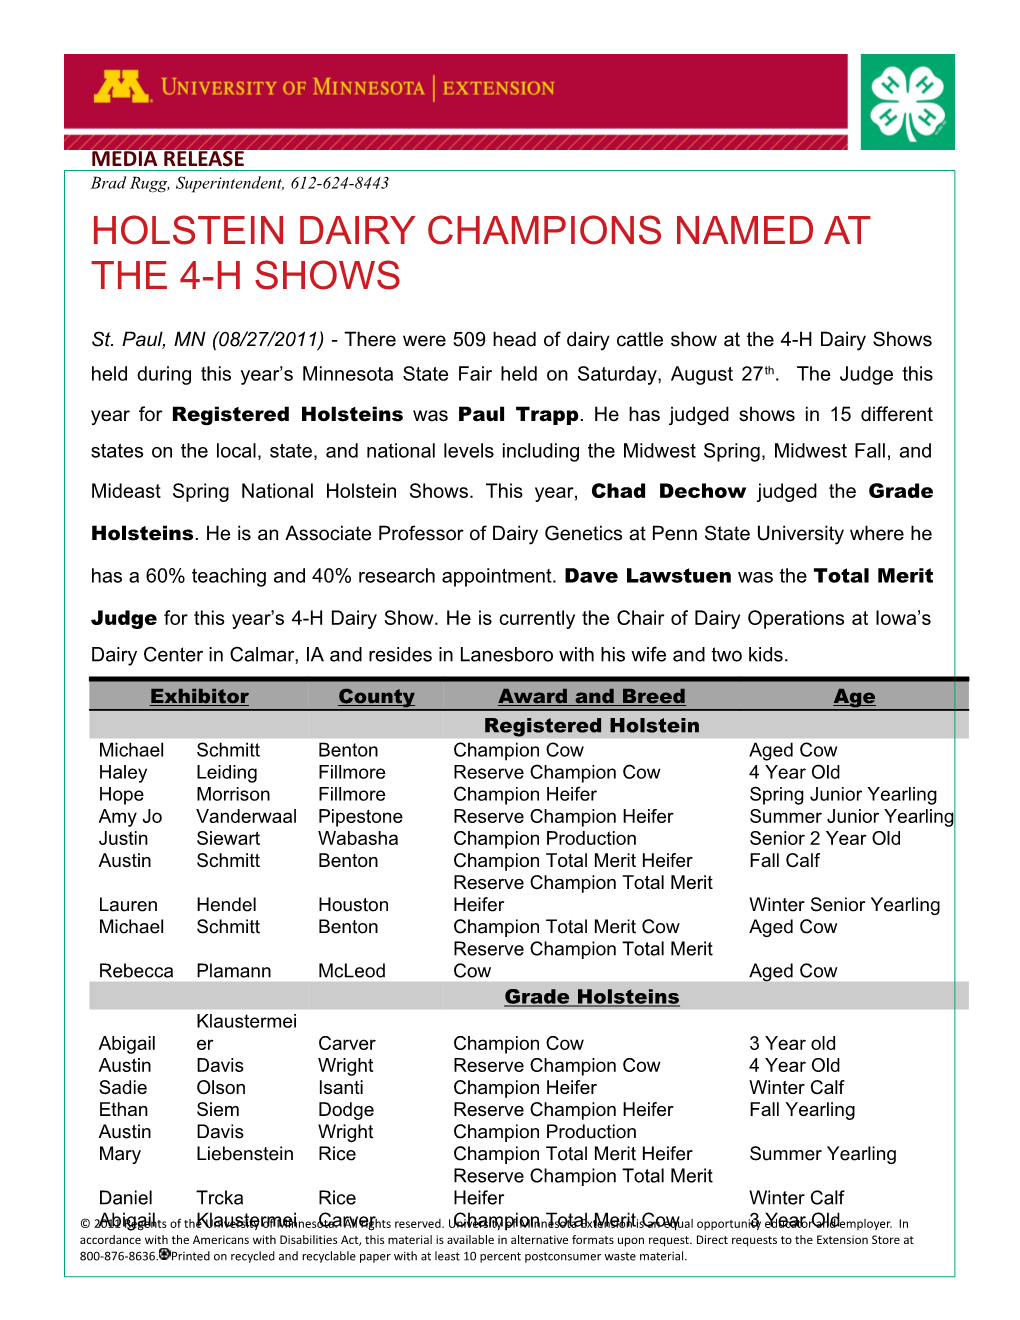 Holstein Dairy Champions Named at the 4-H Shows